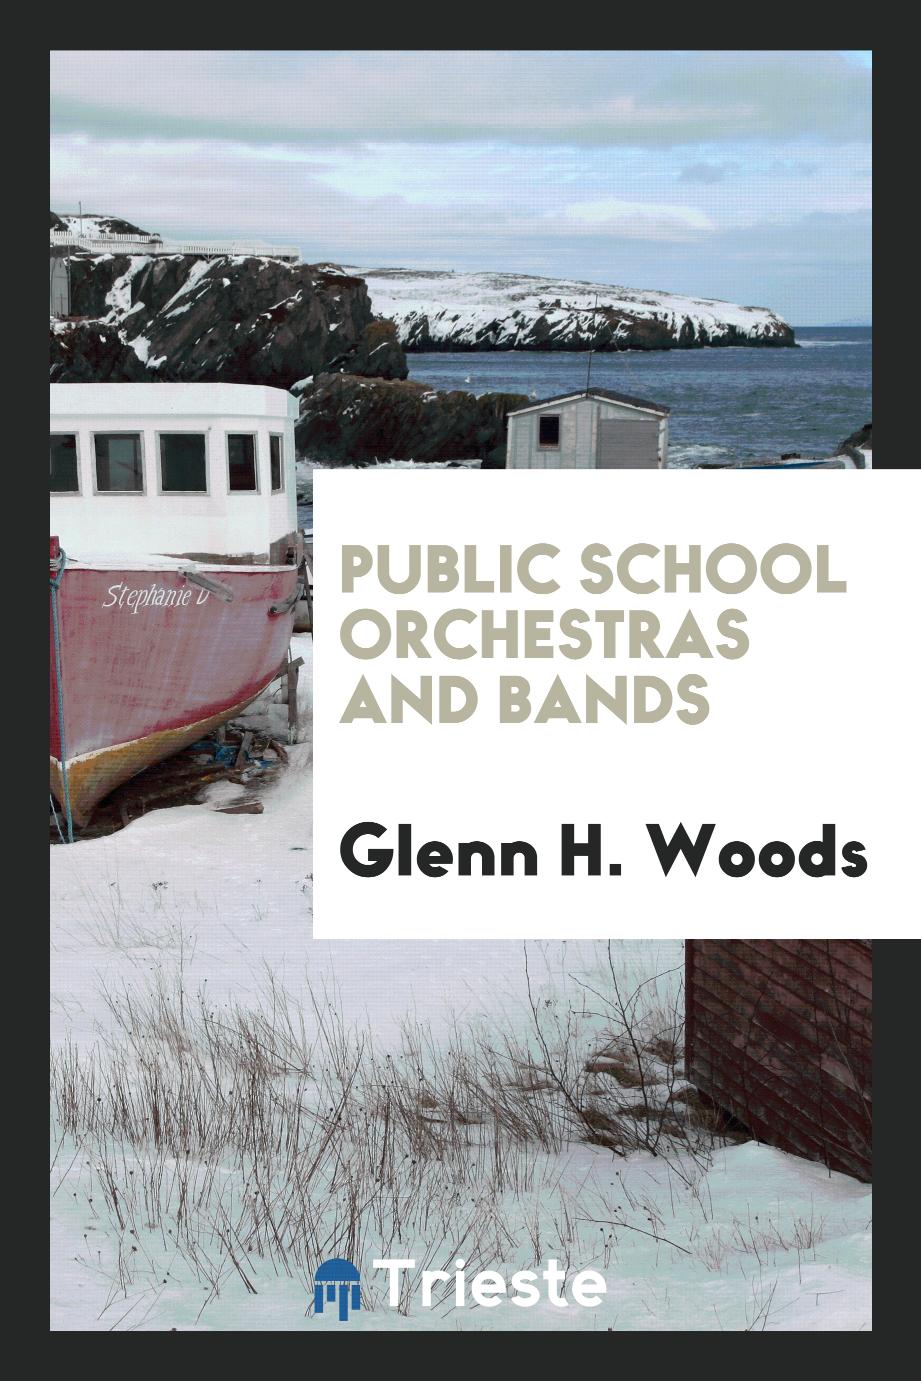 Public school orchestras and bands